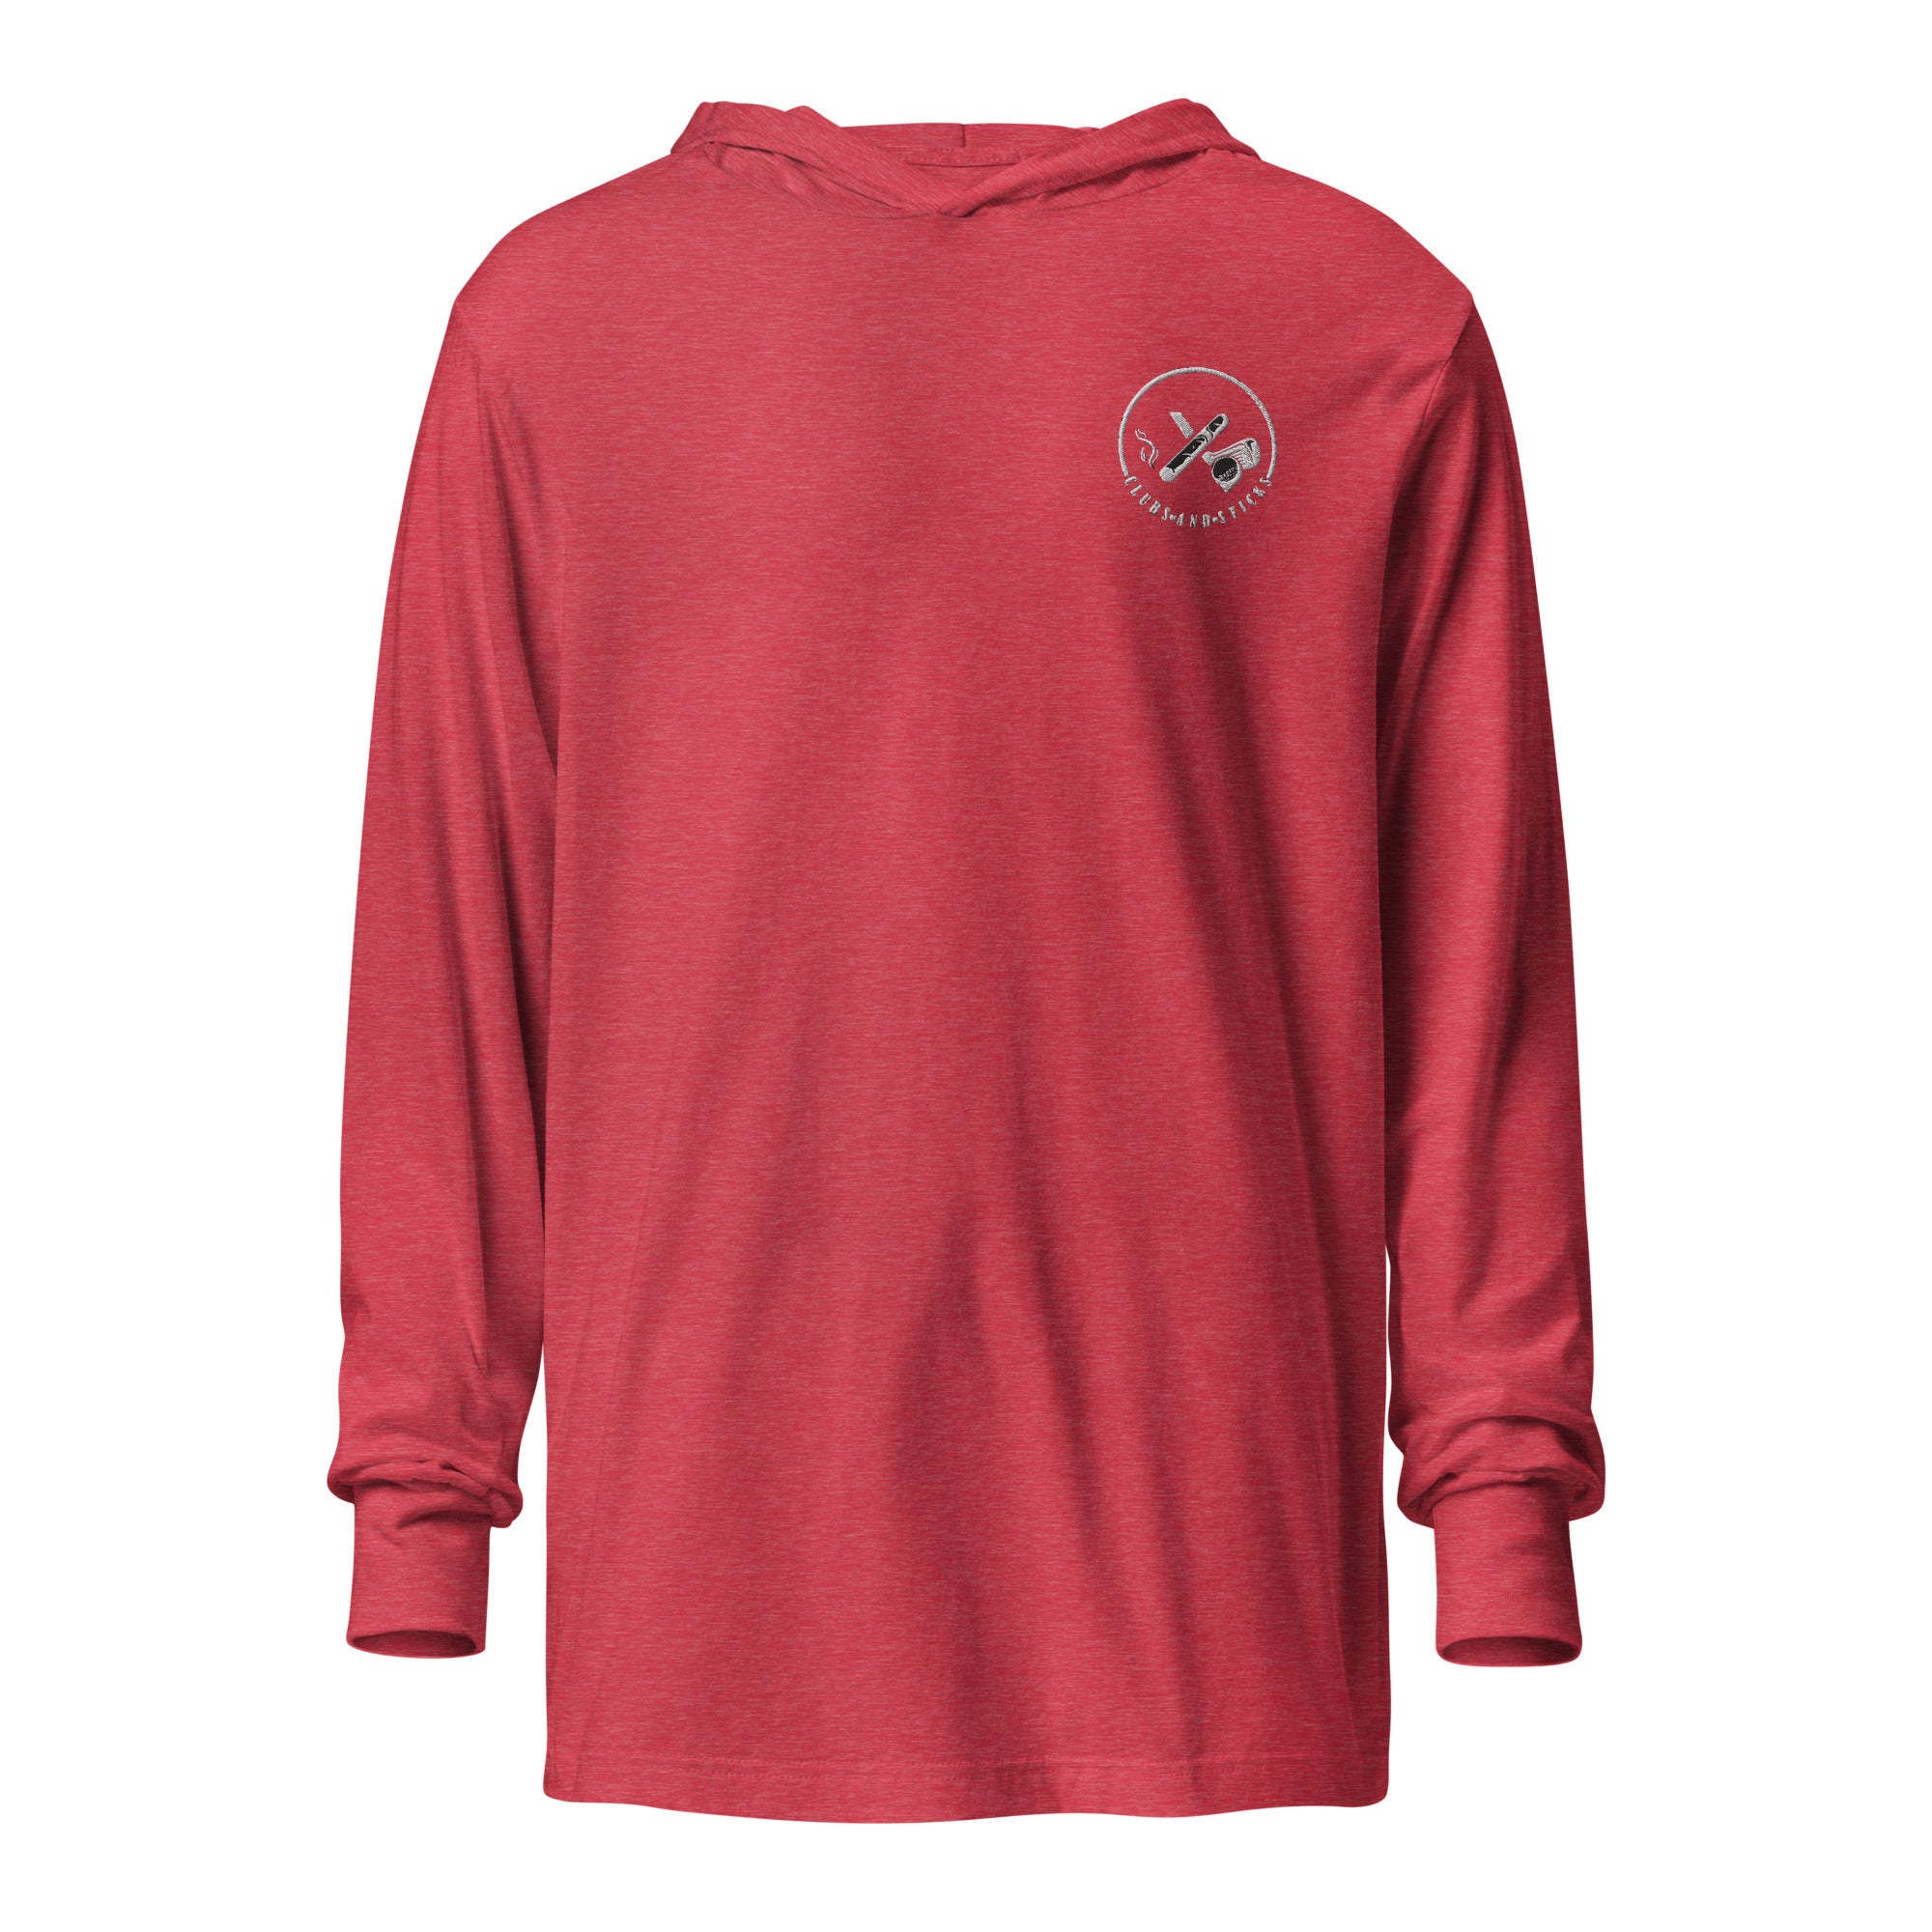 Hooded Embroidered long-sleeve tee